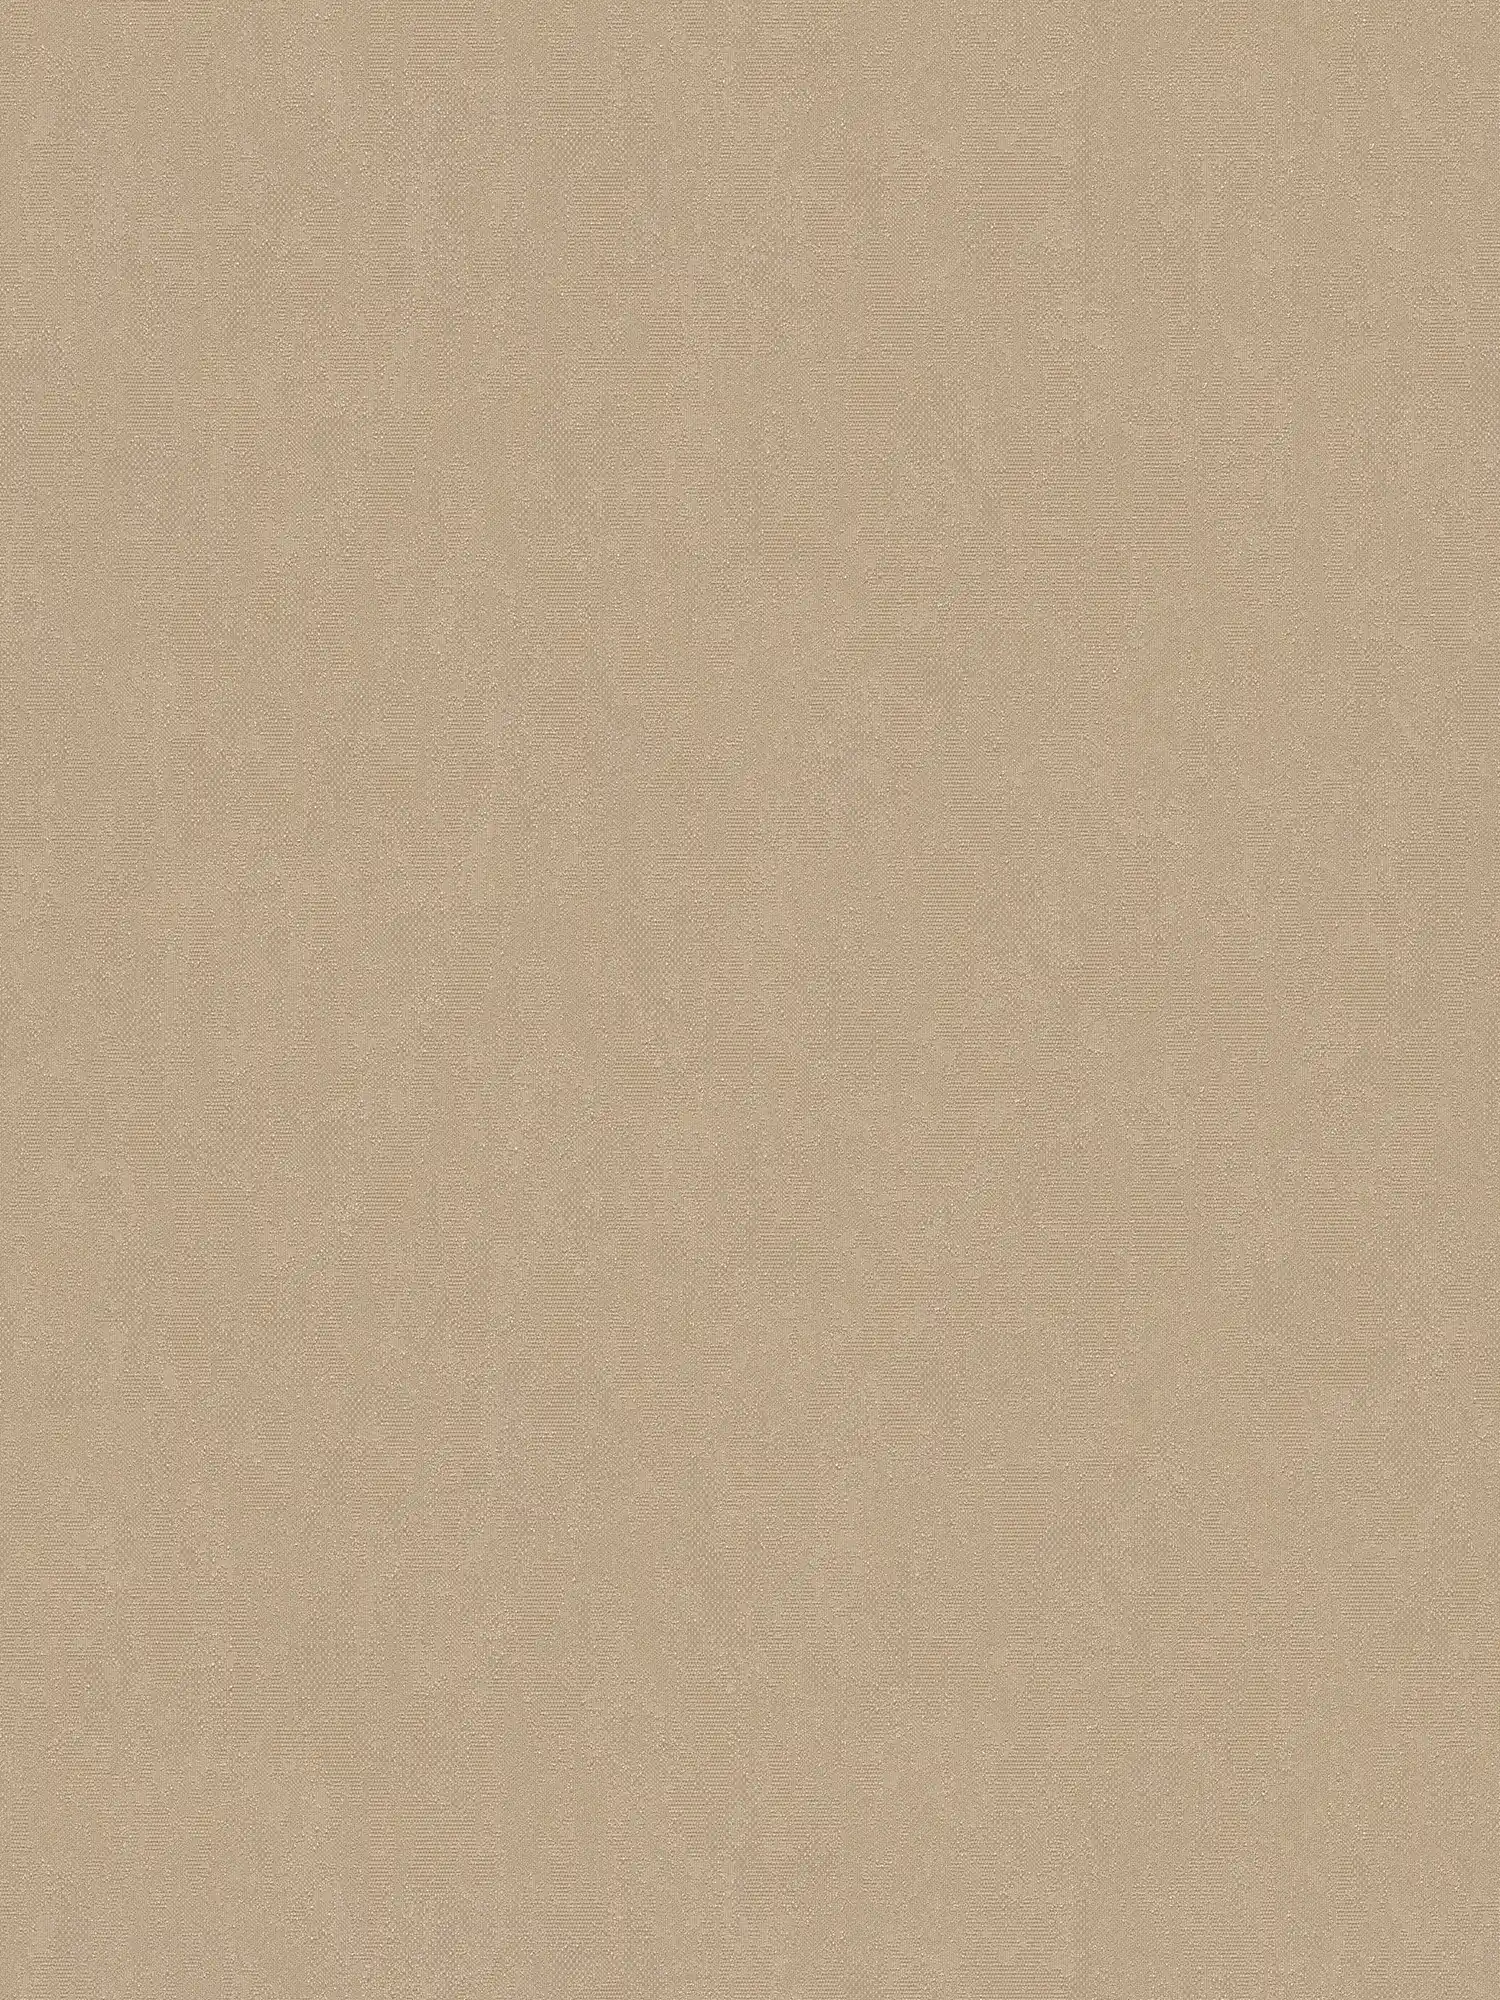 Non-woven wallpaper beige grey with texture design & satin finish
